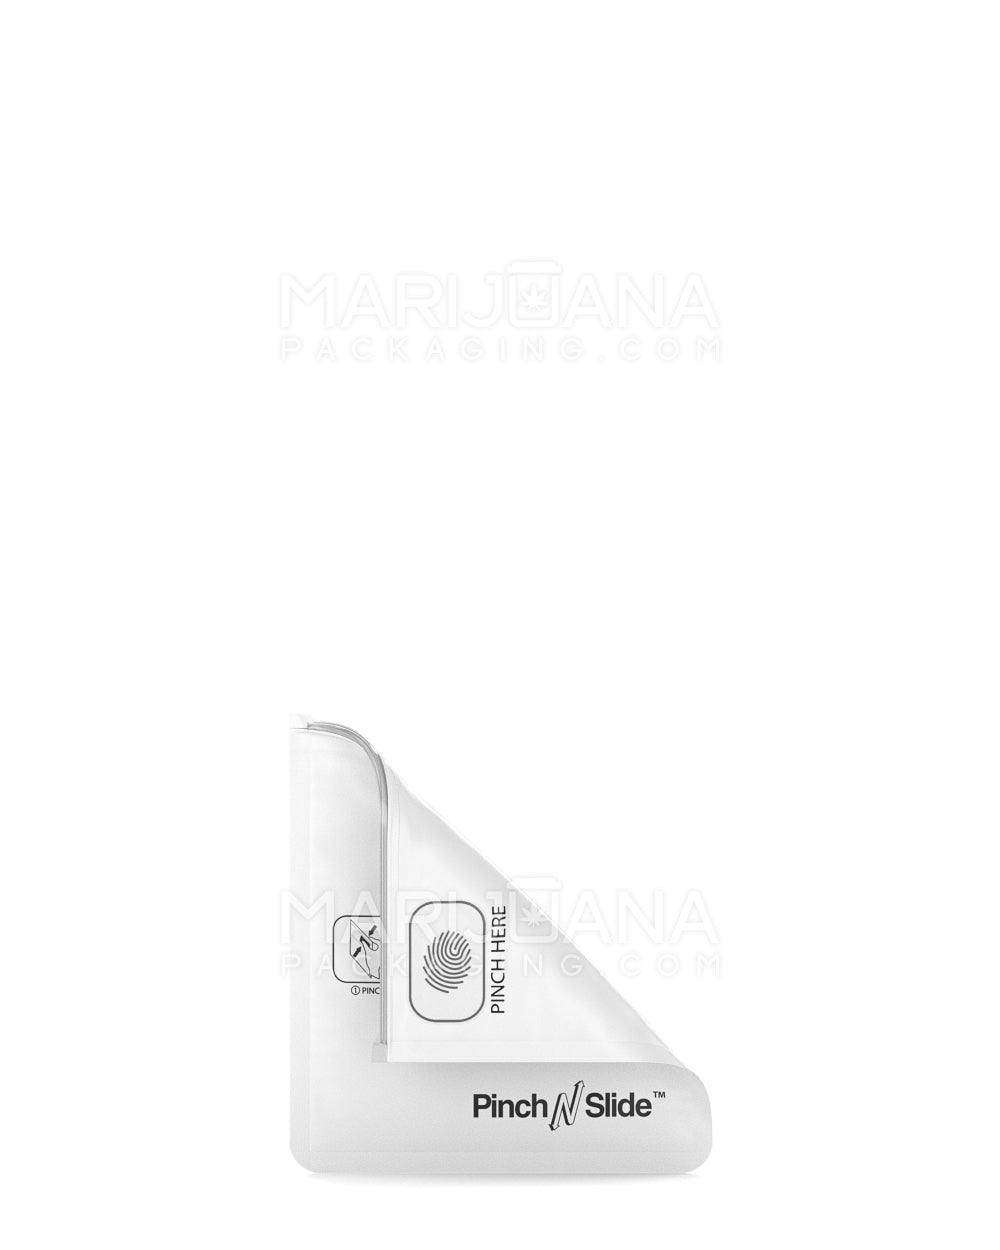 Child Resistant | Pinch N Slide ASTM Matte White Mylar Bags | 3.4in x 3.7in - 1g - 250 Count - 3